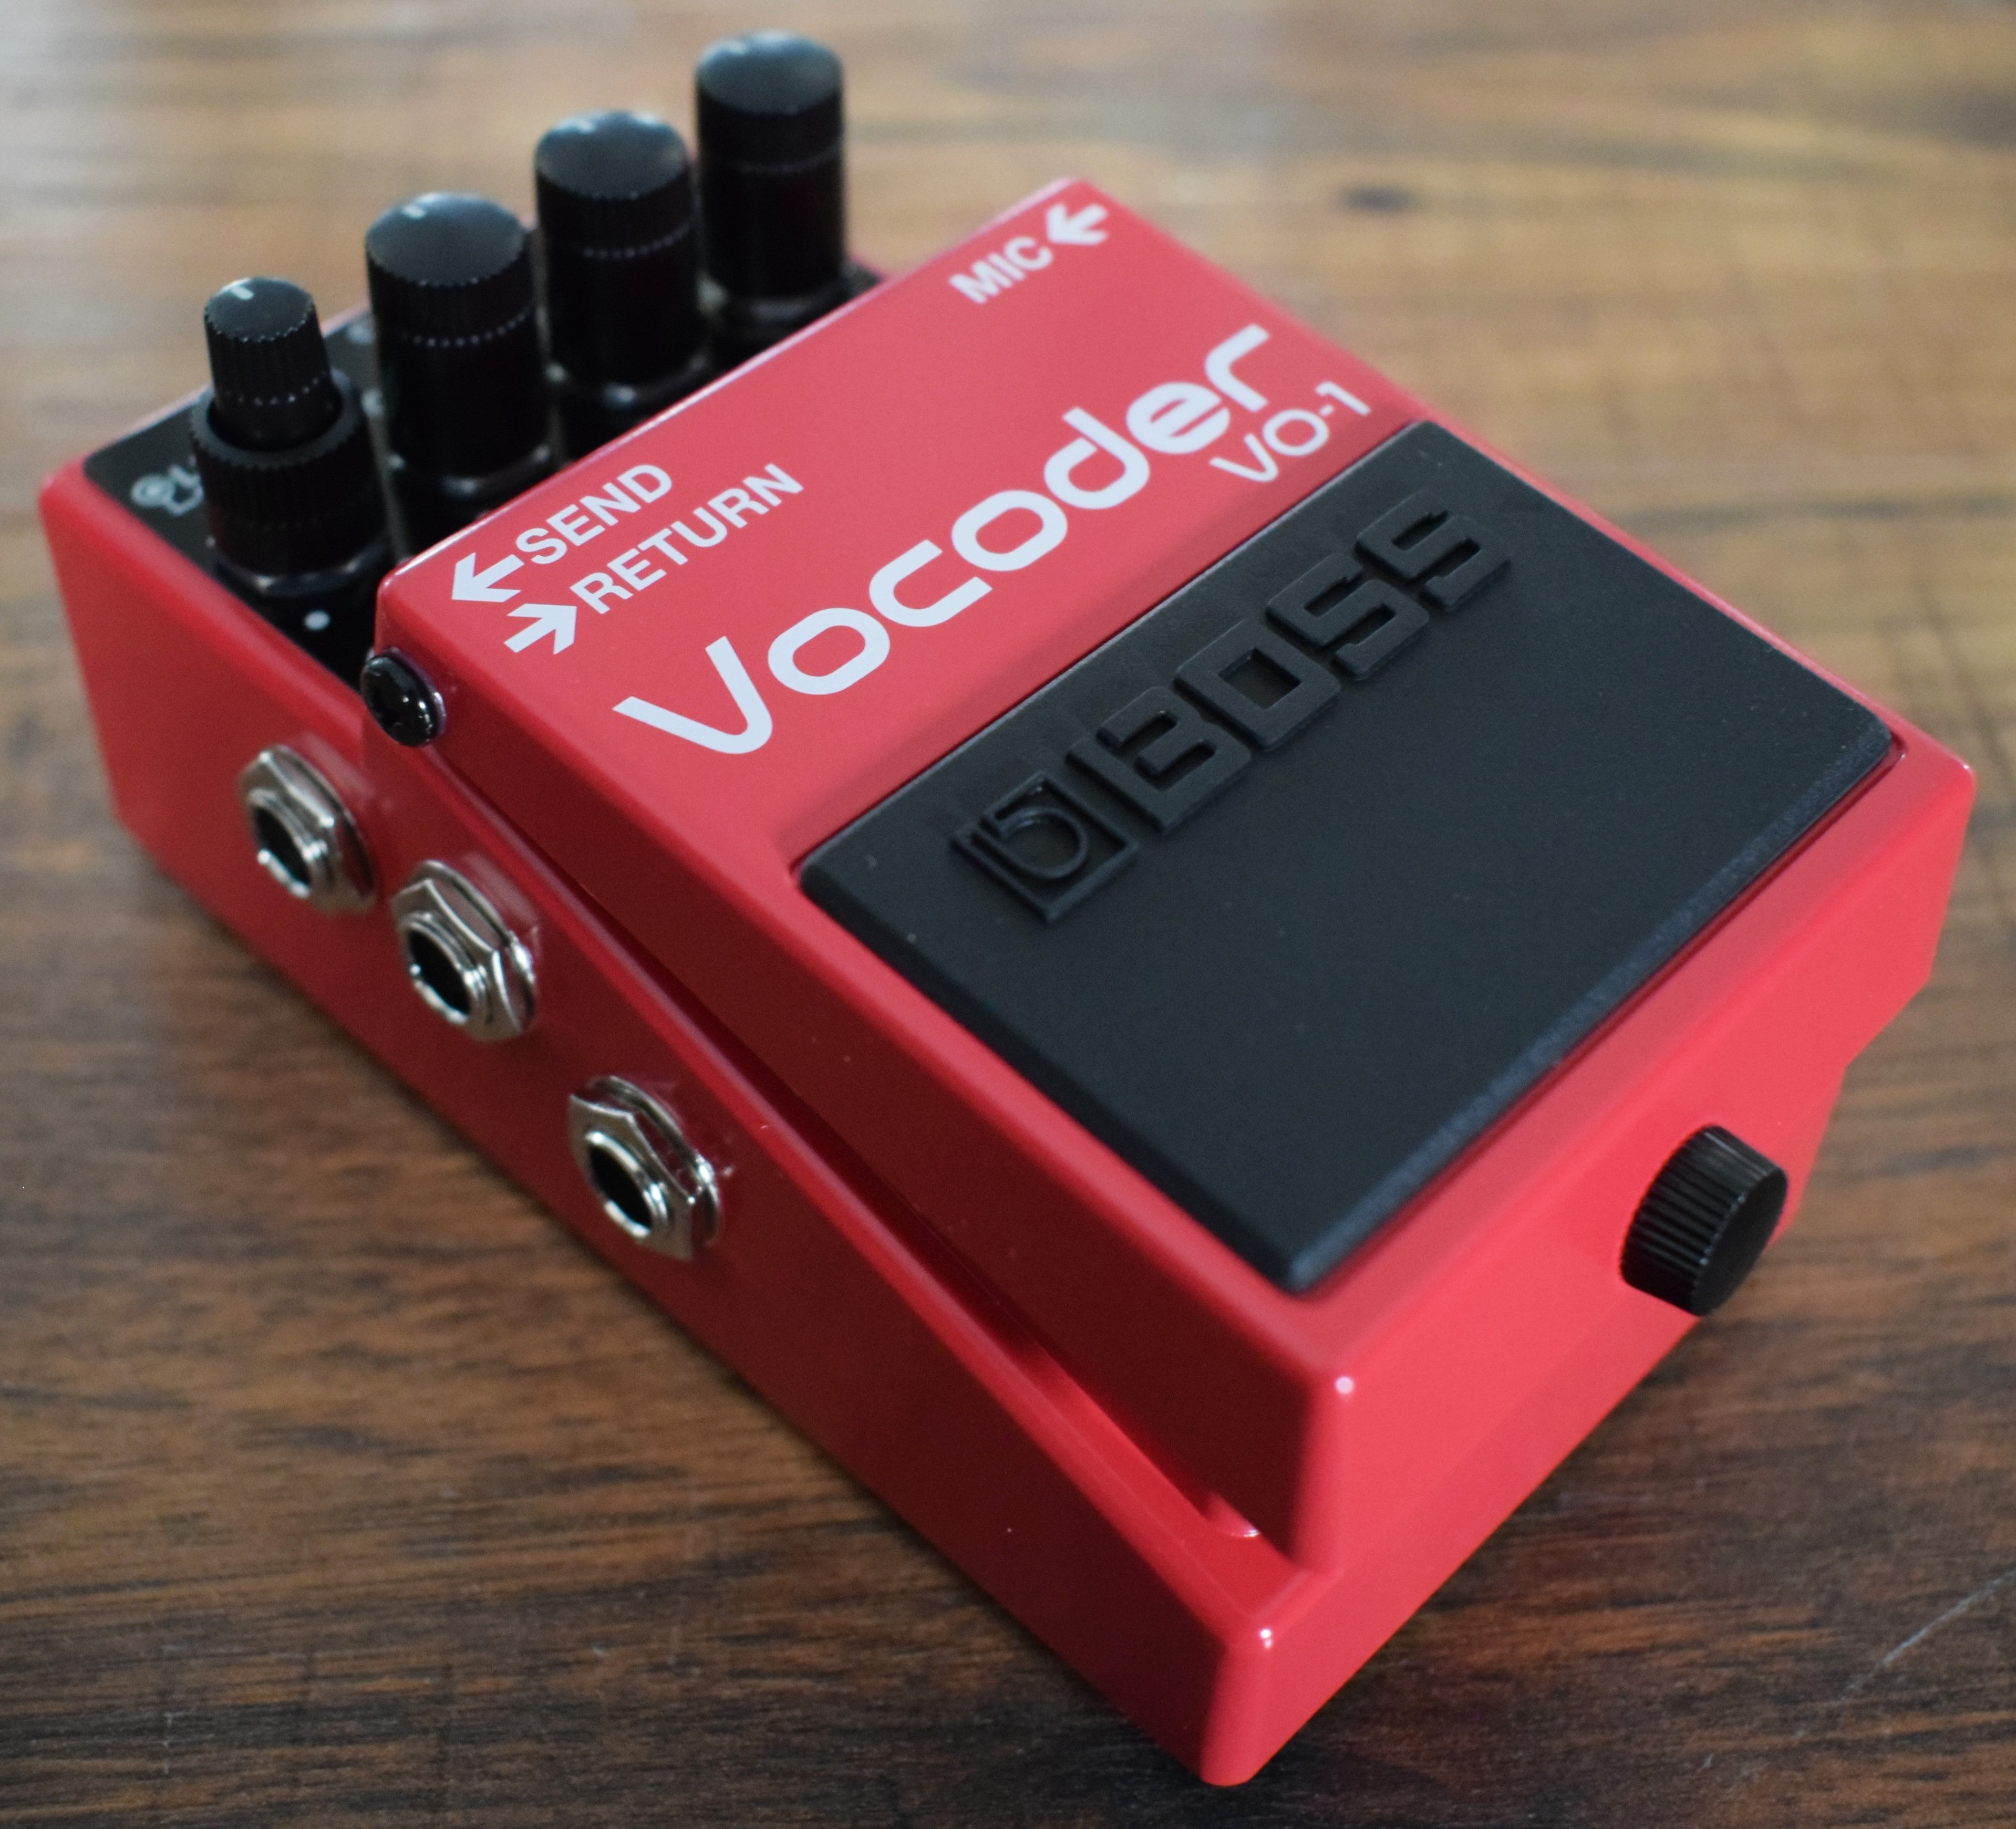 Boss VO-1 Vocoder Vocal Effect Pedal – Specialty Traders